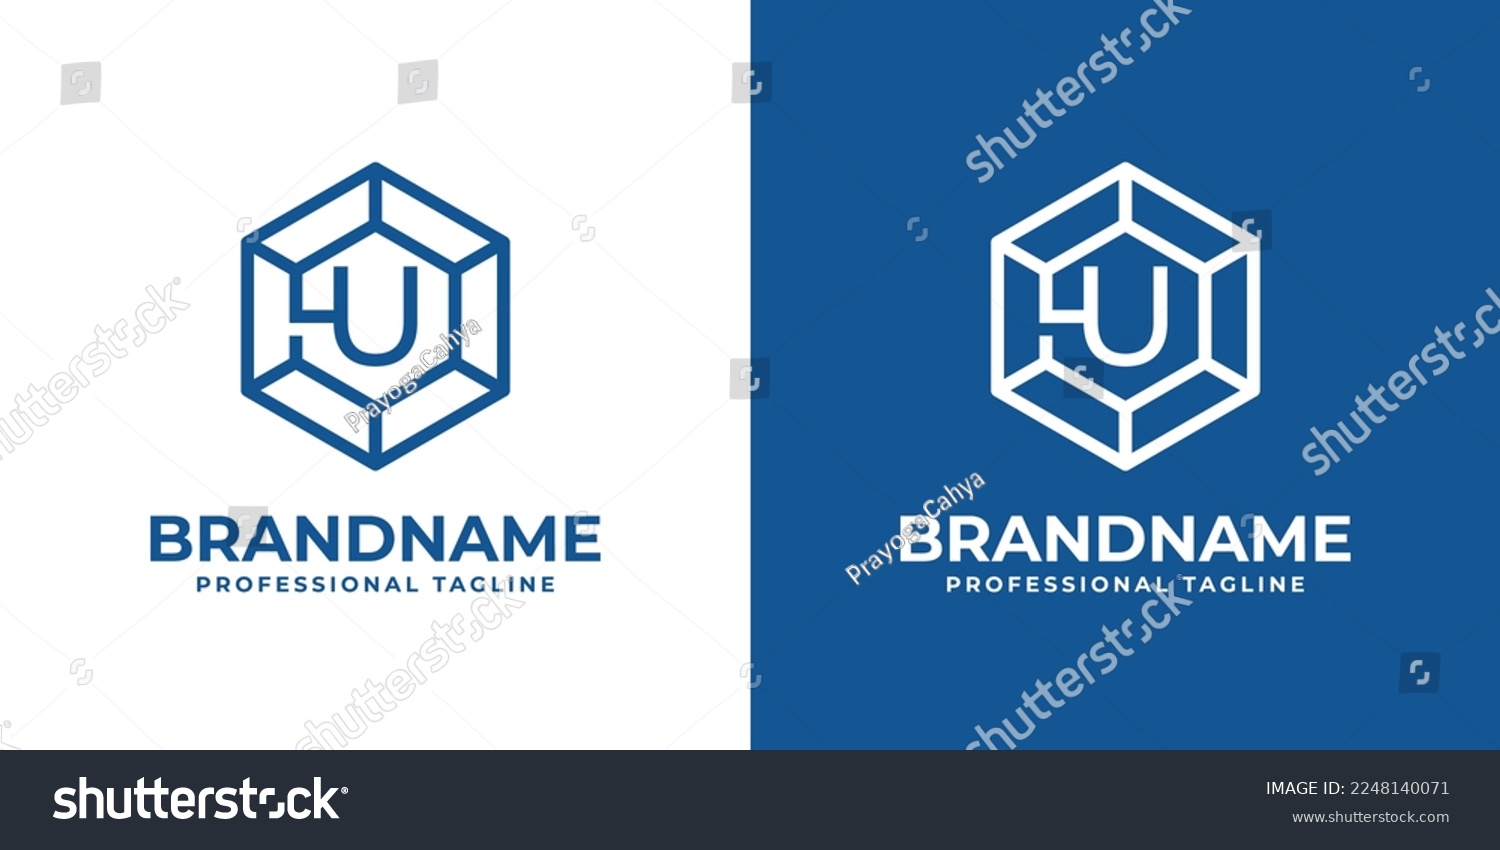 SVG of Initial U Hexagon Diamond Logo, suitable for any business with U initial. svg